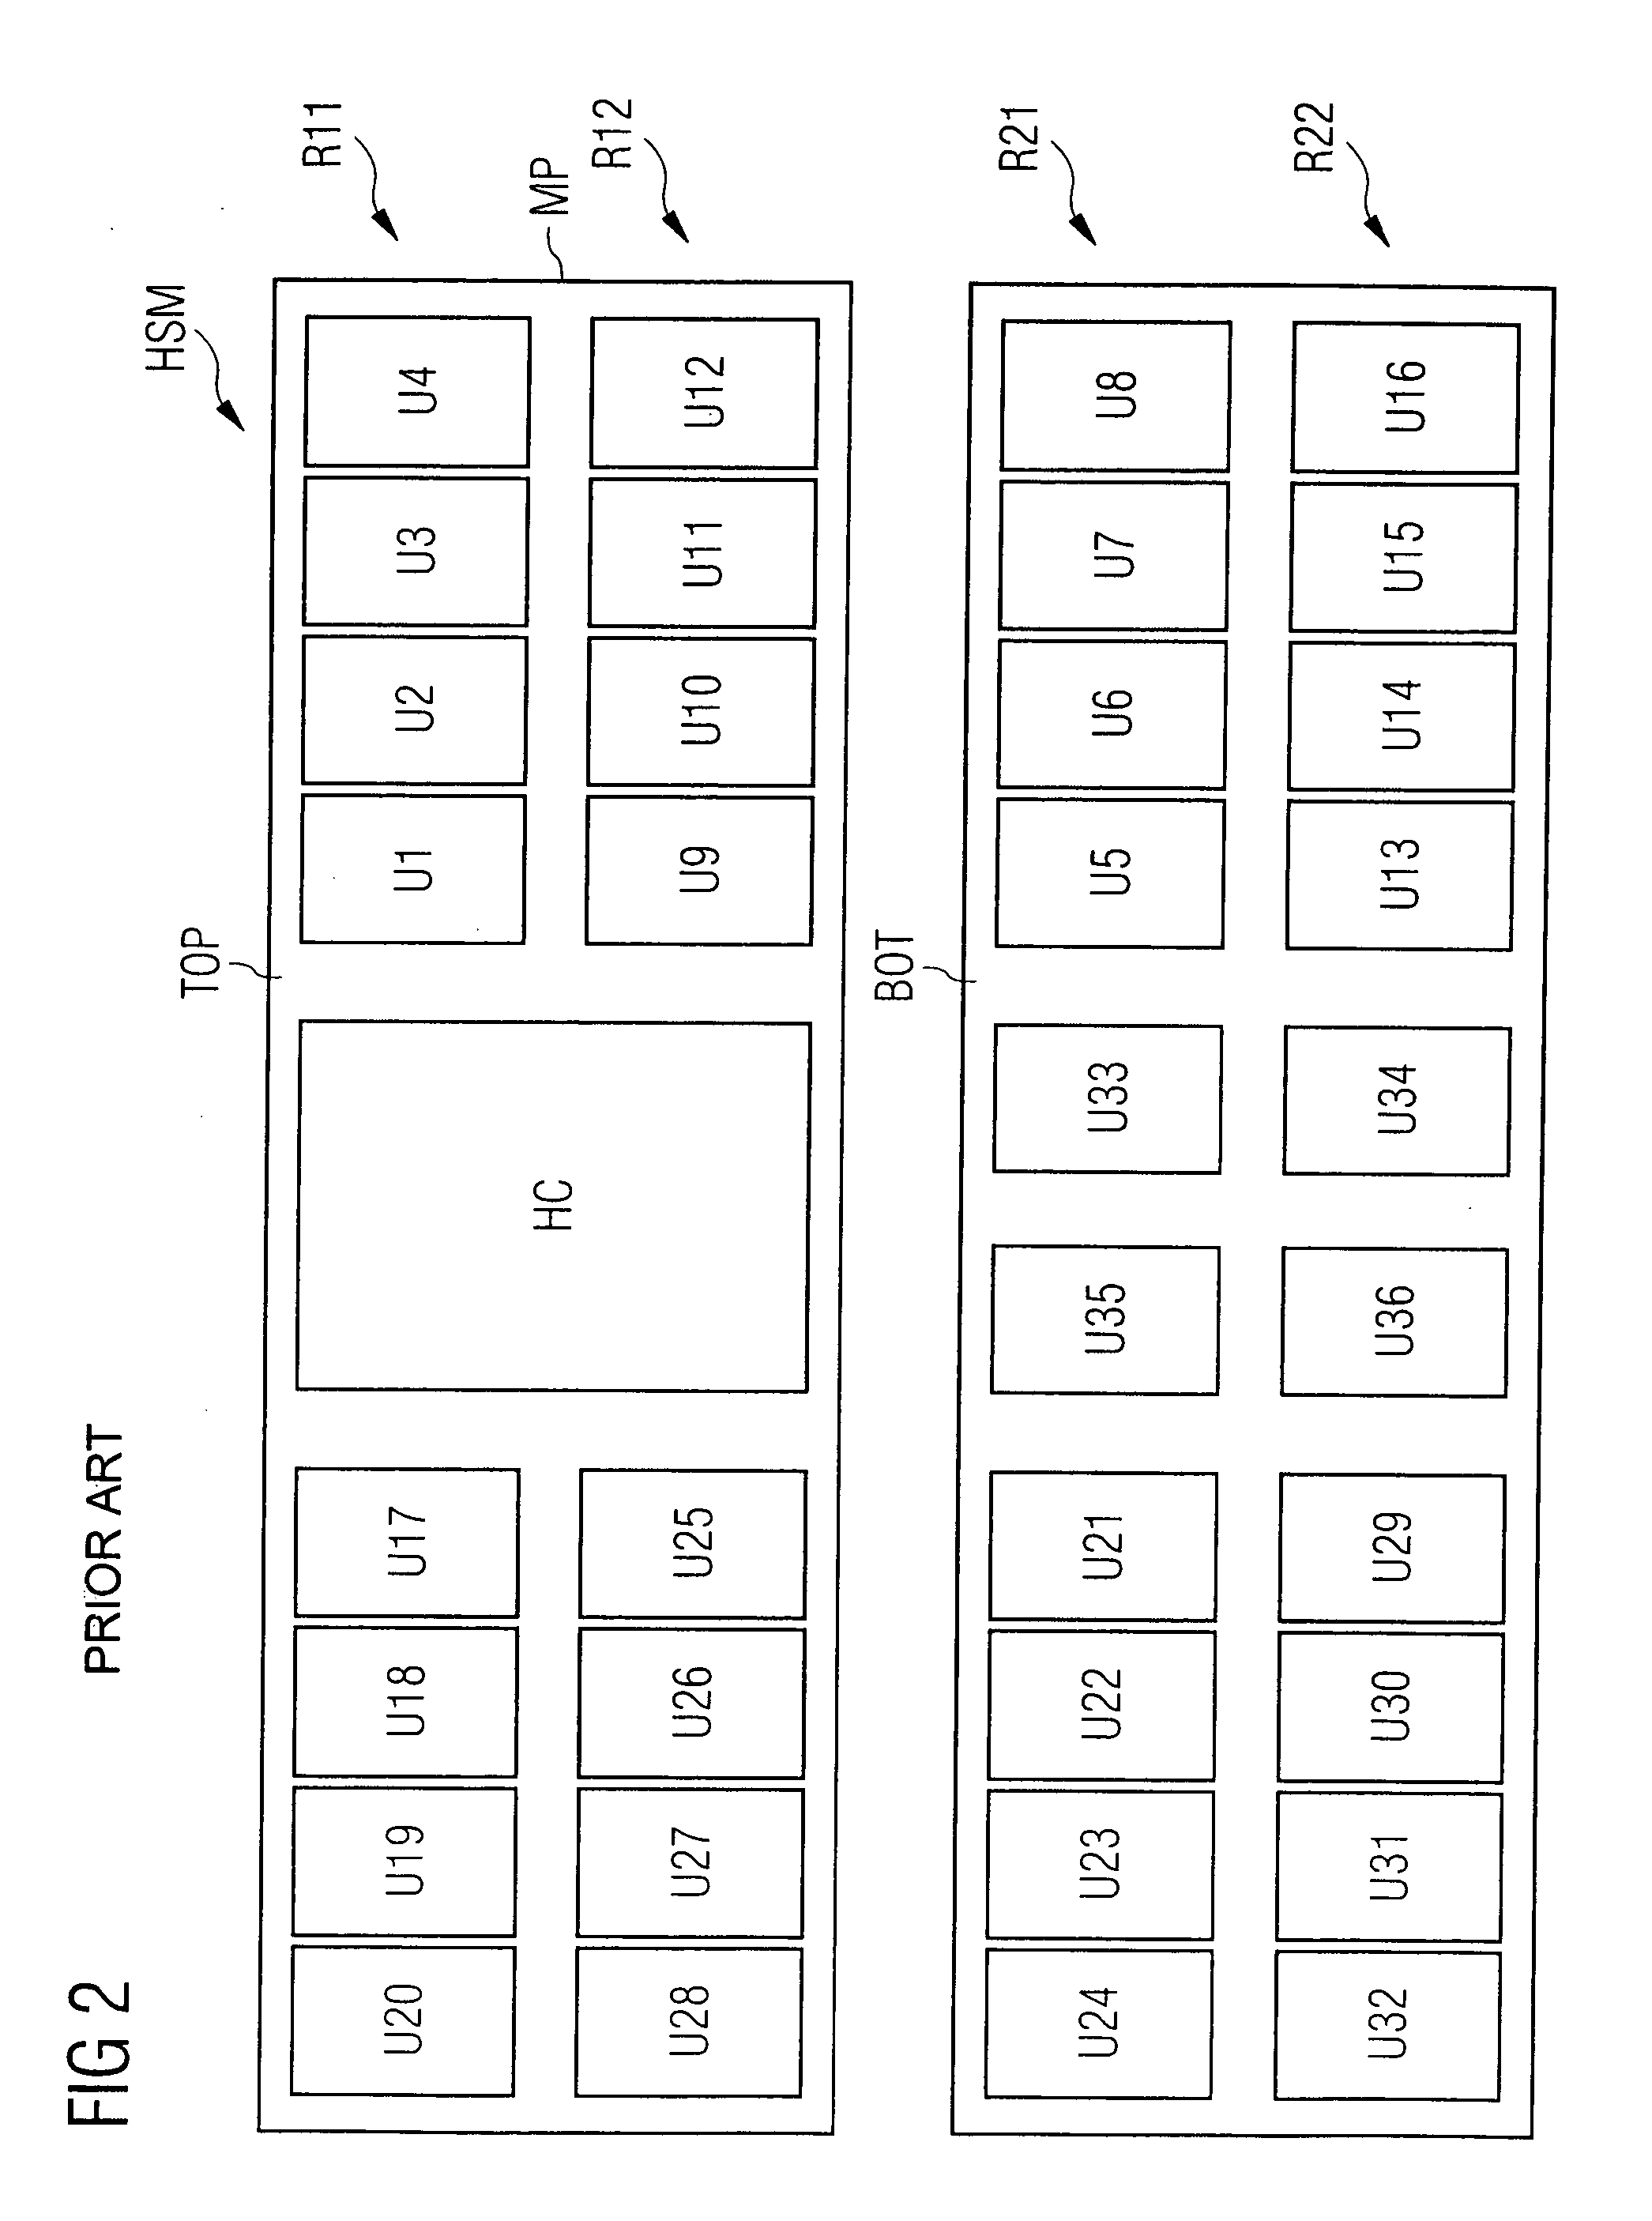 Semiconductor memory module with error correction